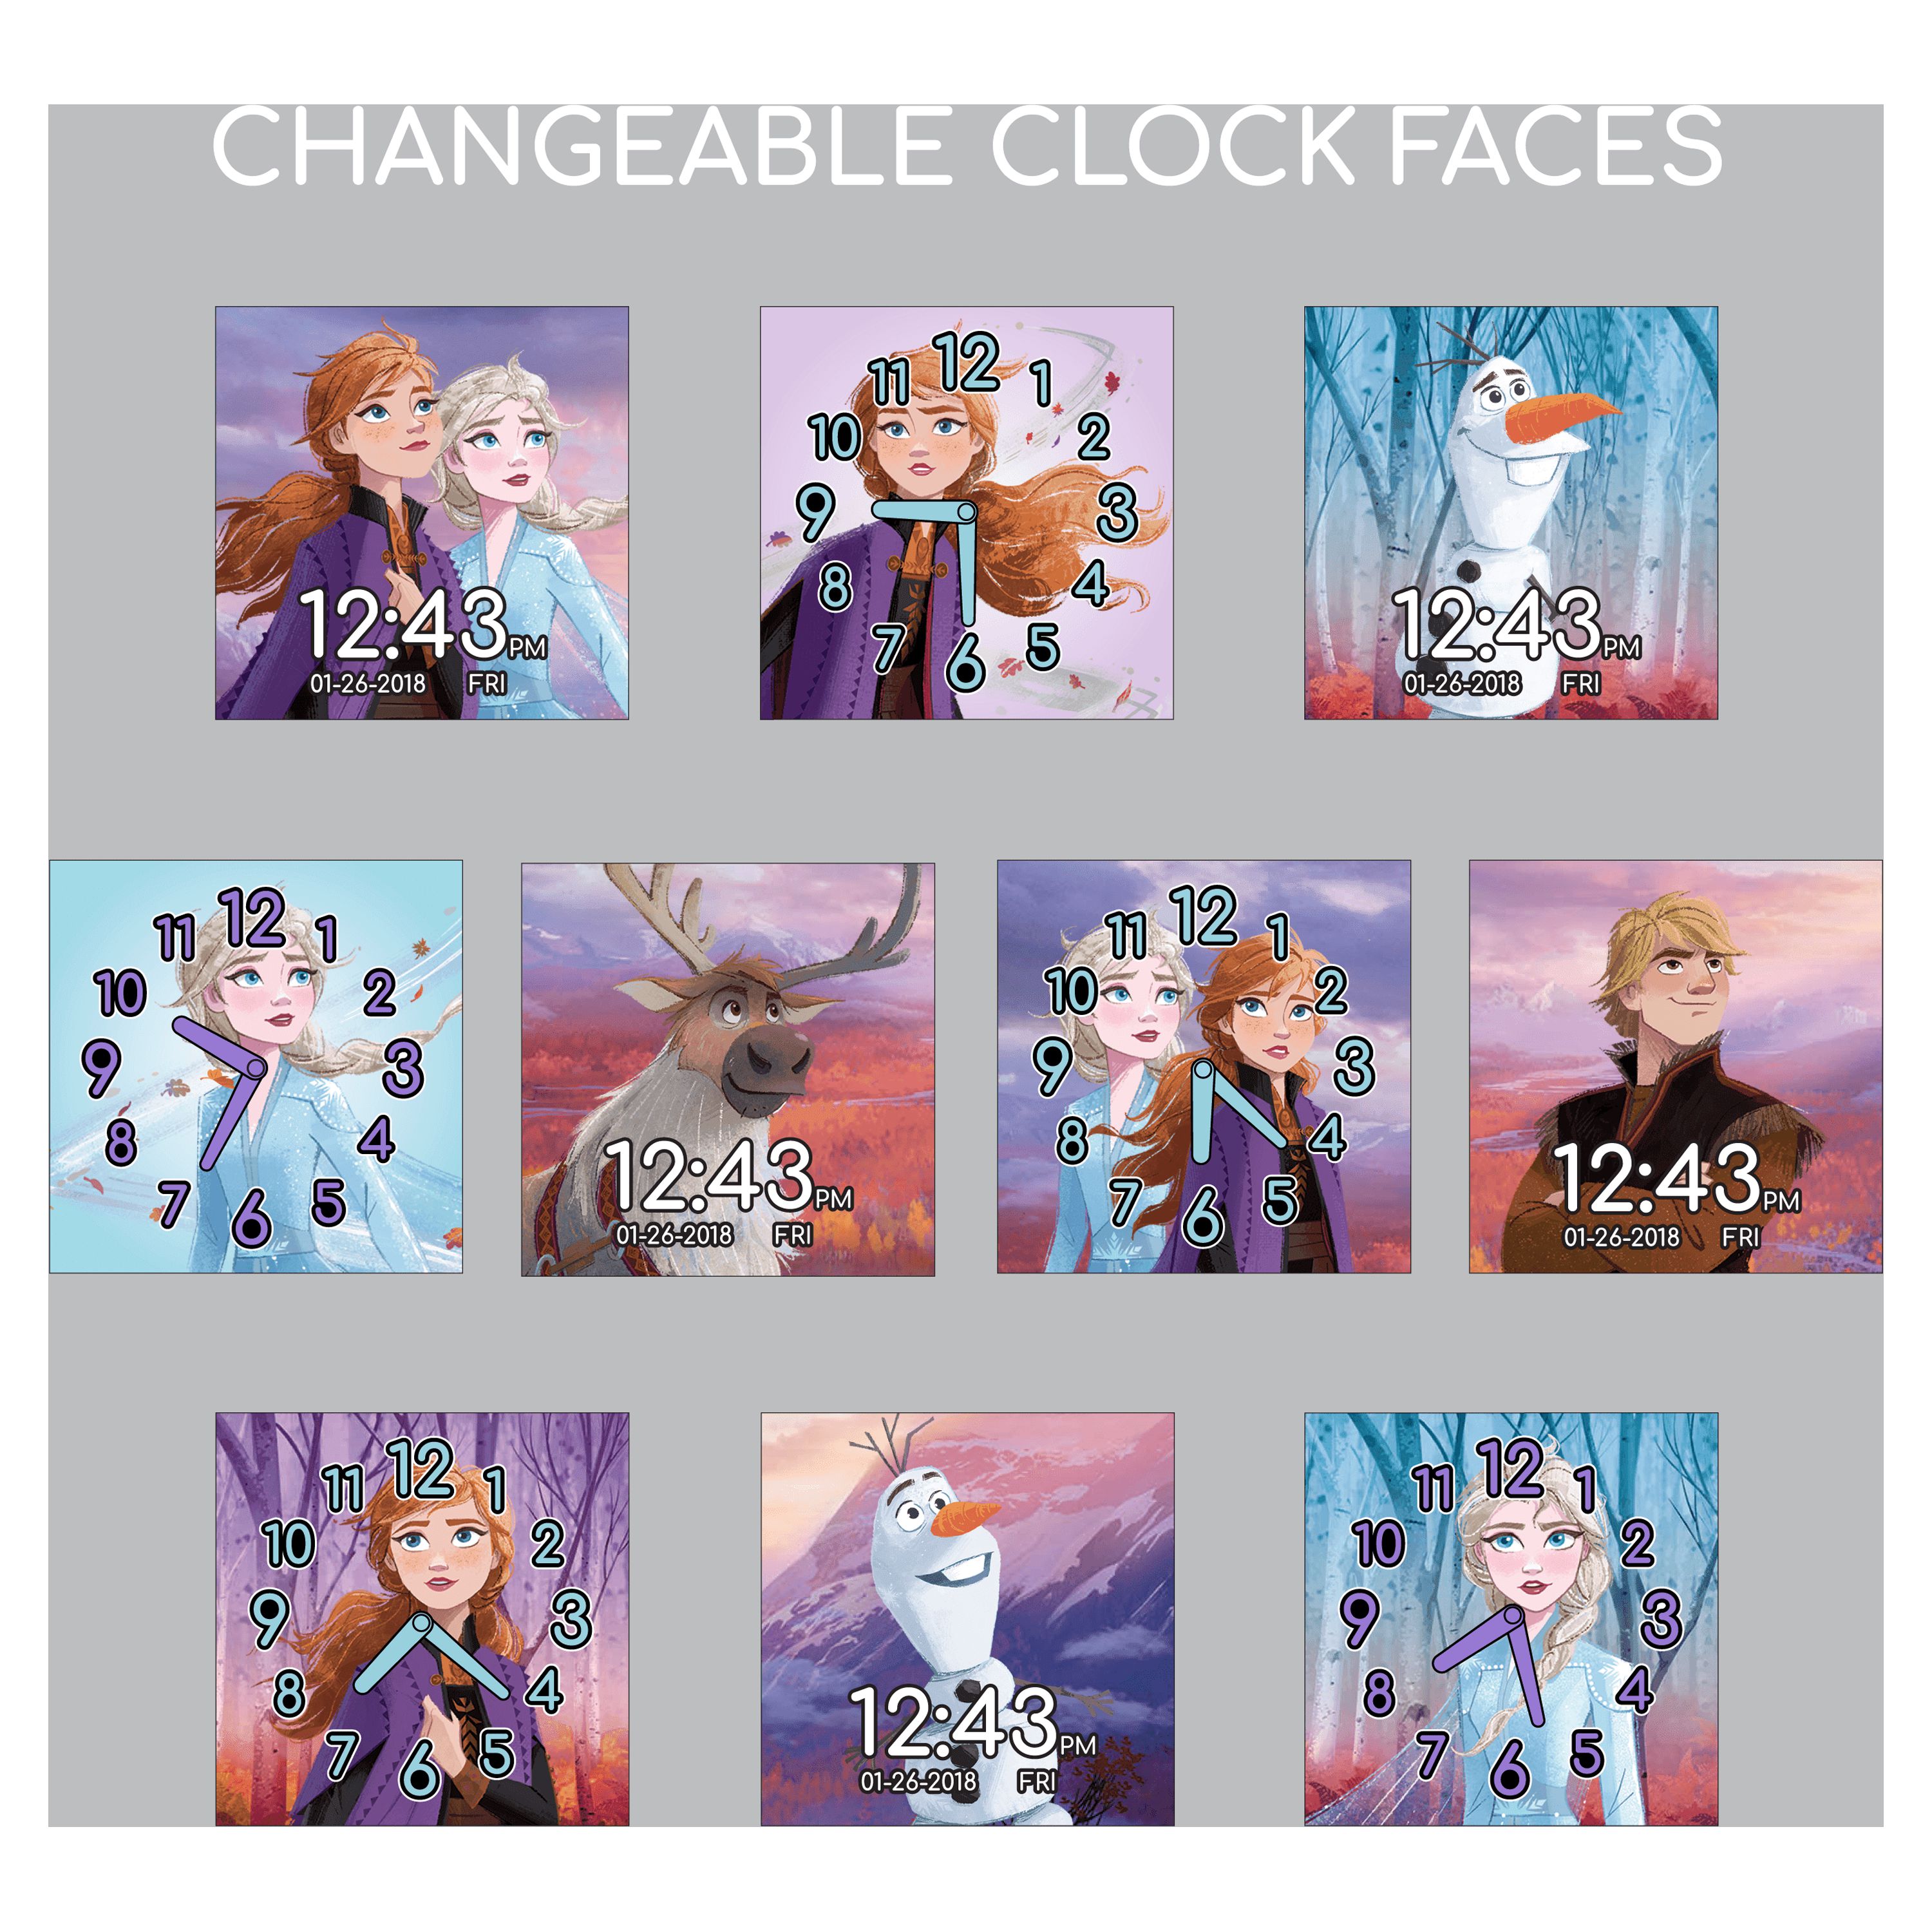 Disney Frozen 2 Female Child iTime Interactive Smart Watch 40mm in Blue (FZN4587) - image 4 of 5